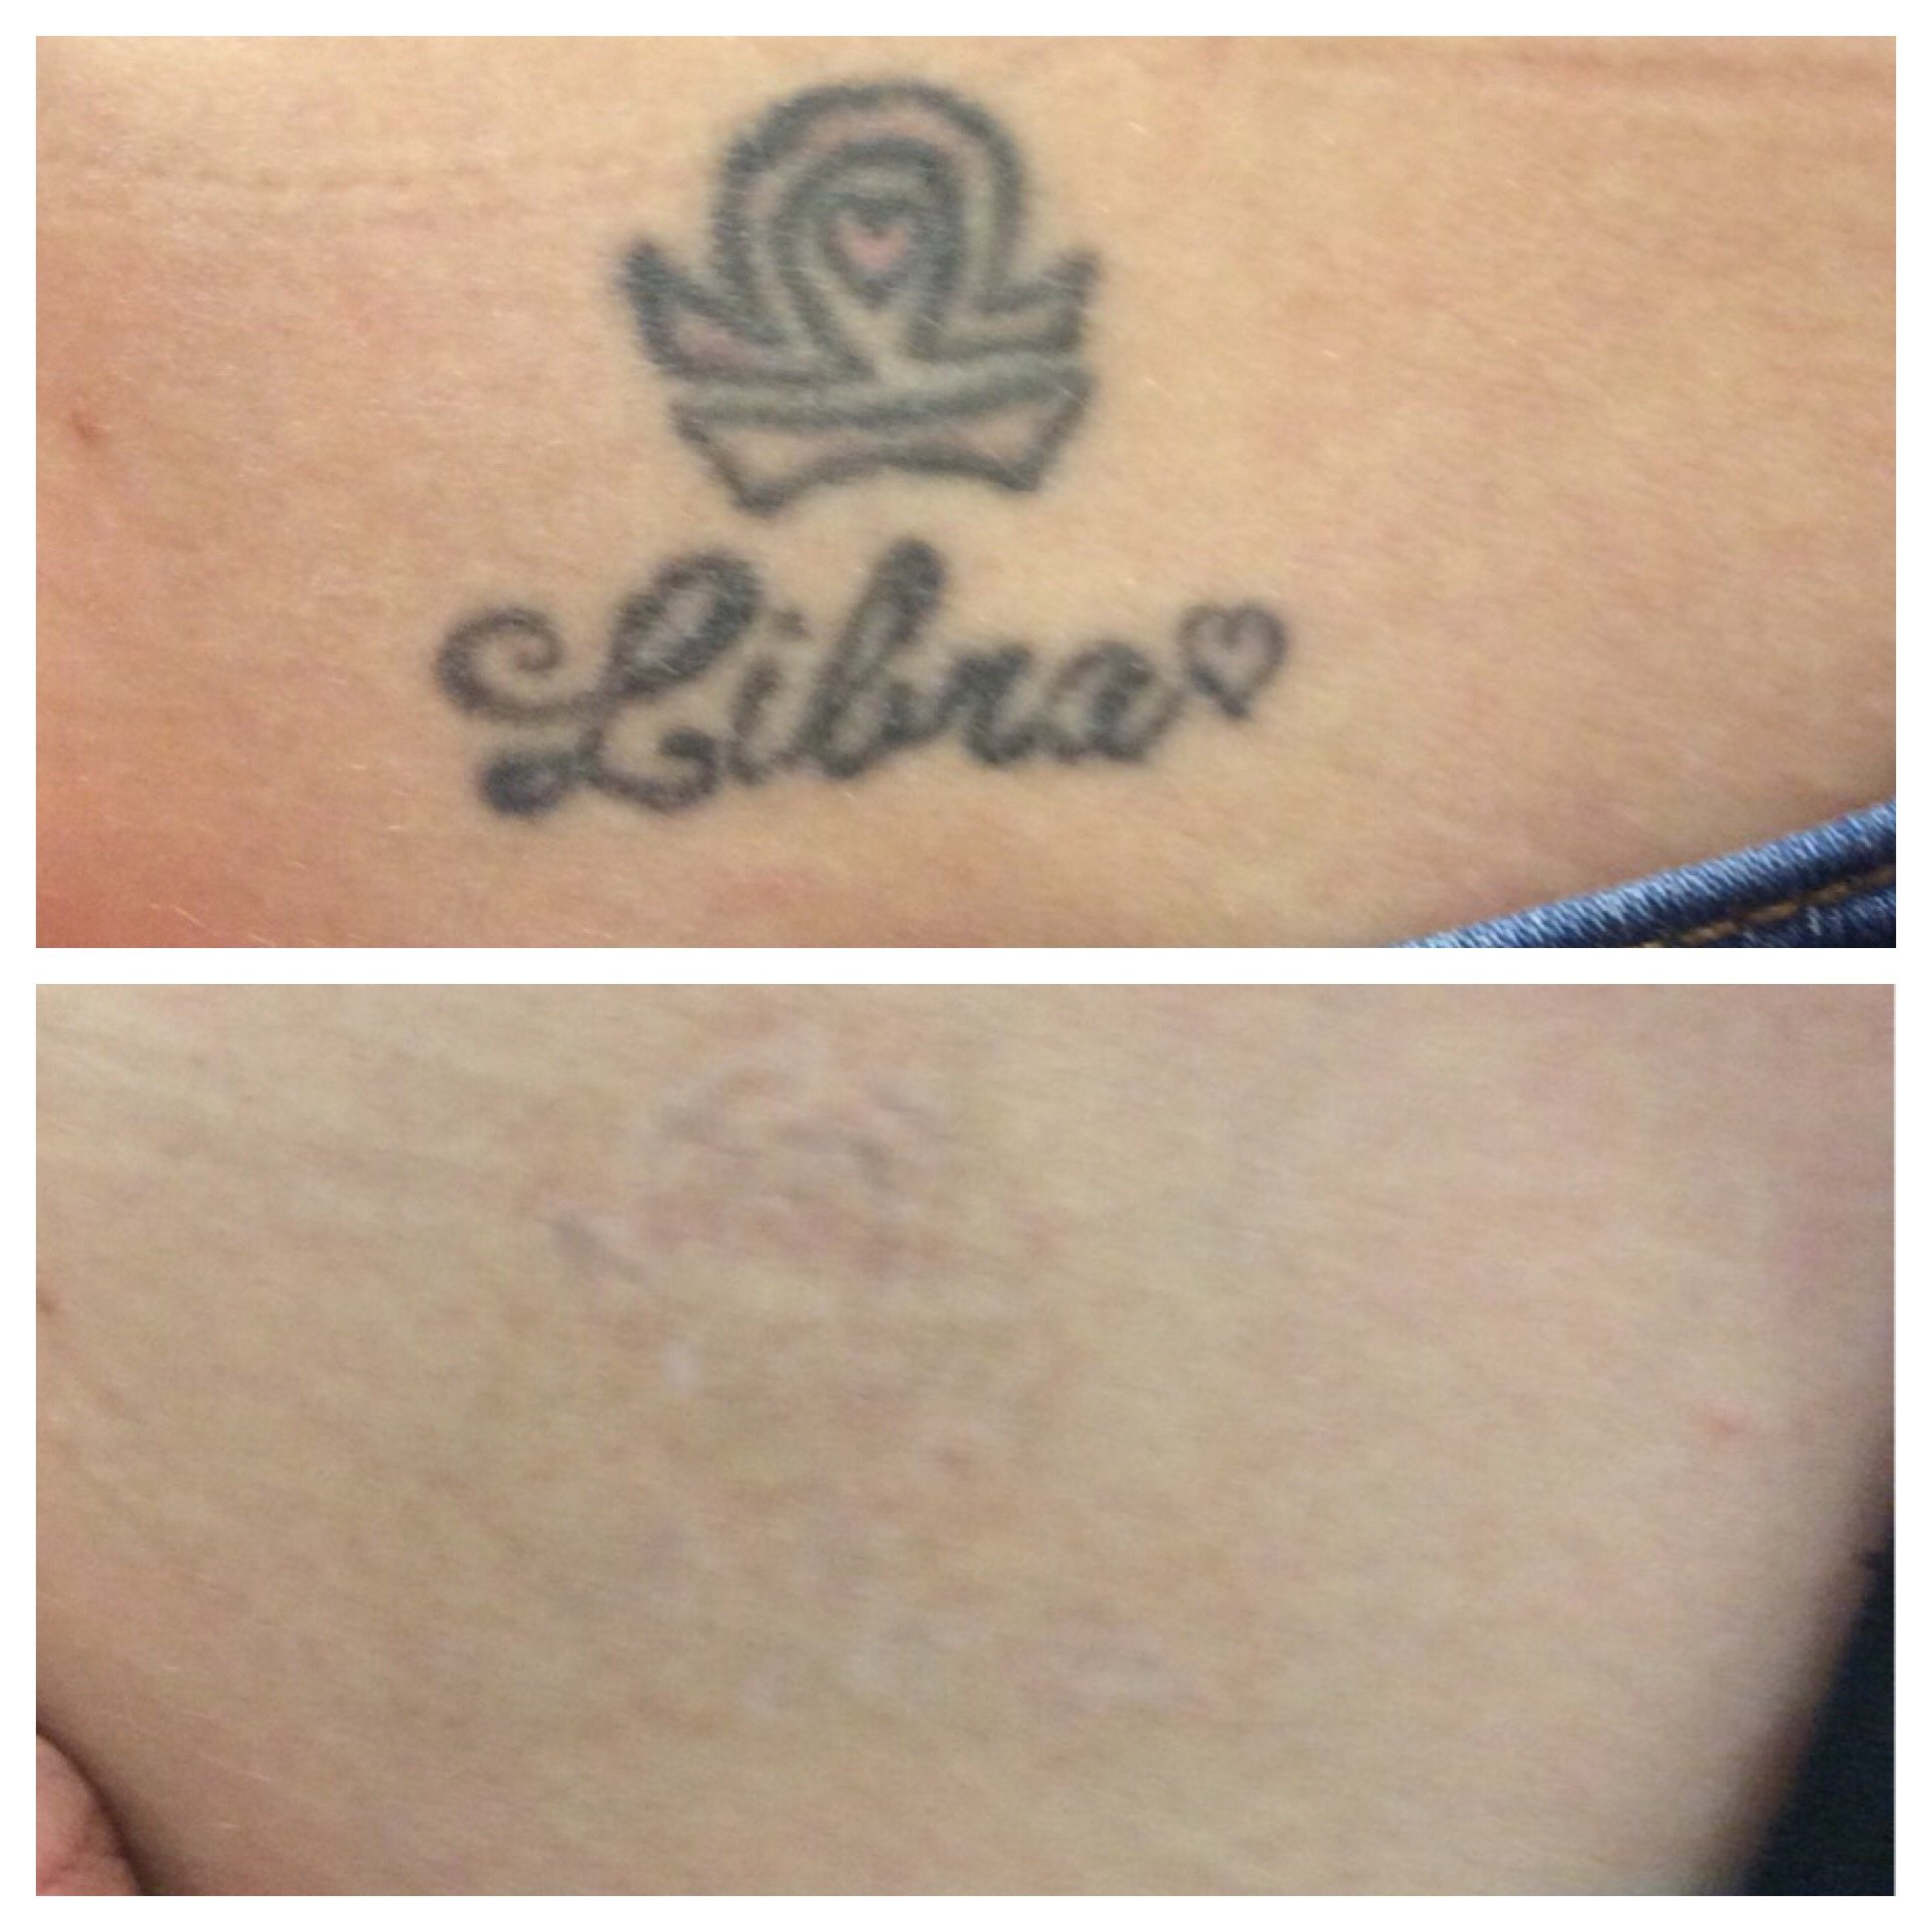 Before and after top and bottom of tattoo removal of a Libra tattoo